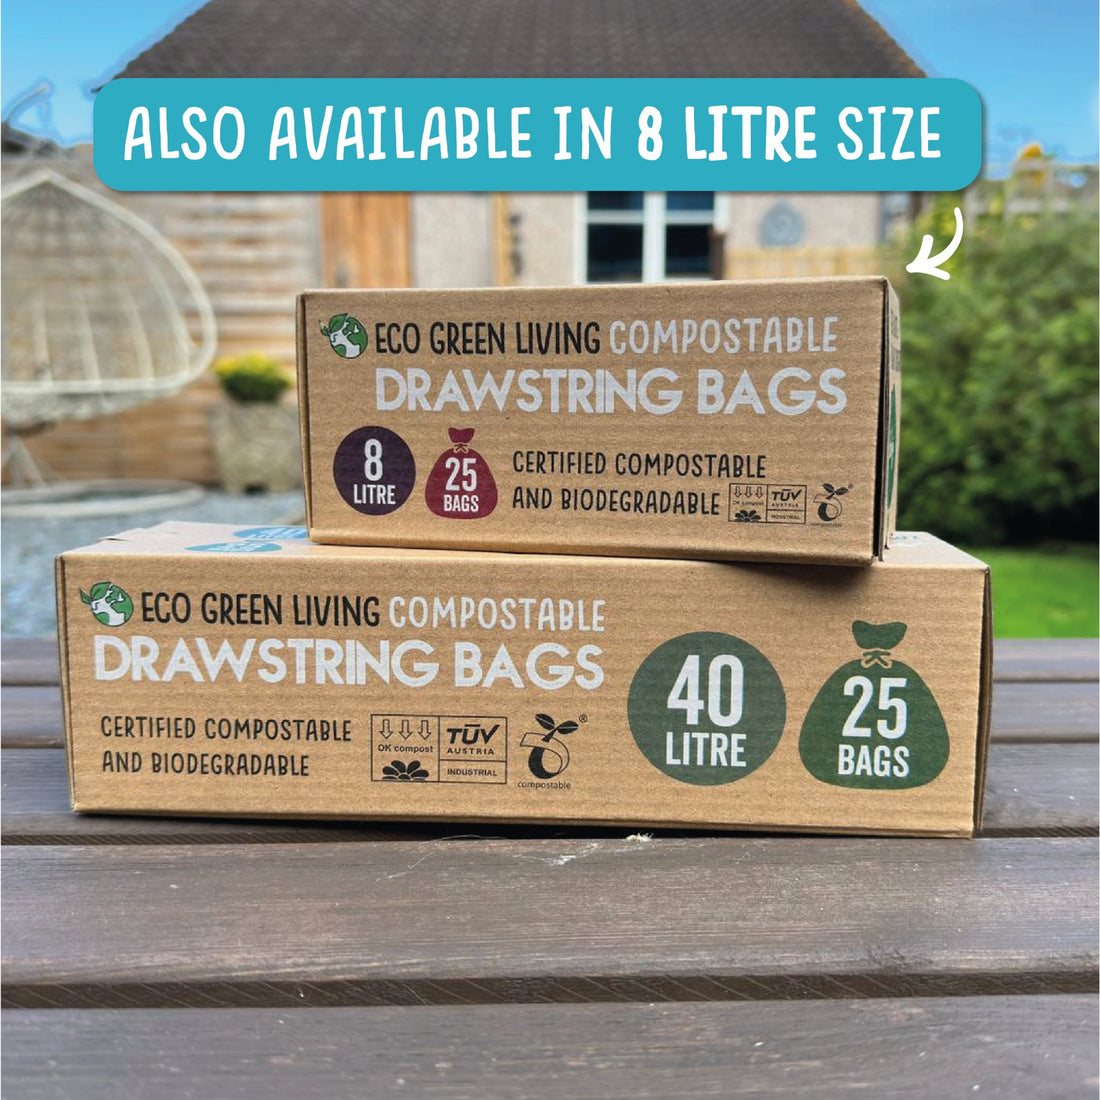 Eco Green Living Introduces Certified Home Compostable Drawstring Bags, Paving the Way for Eco-Friendly Living - EcoGreenLiving